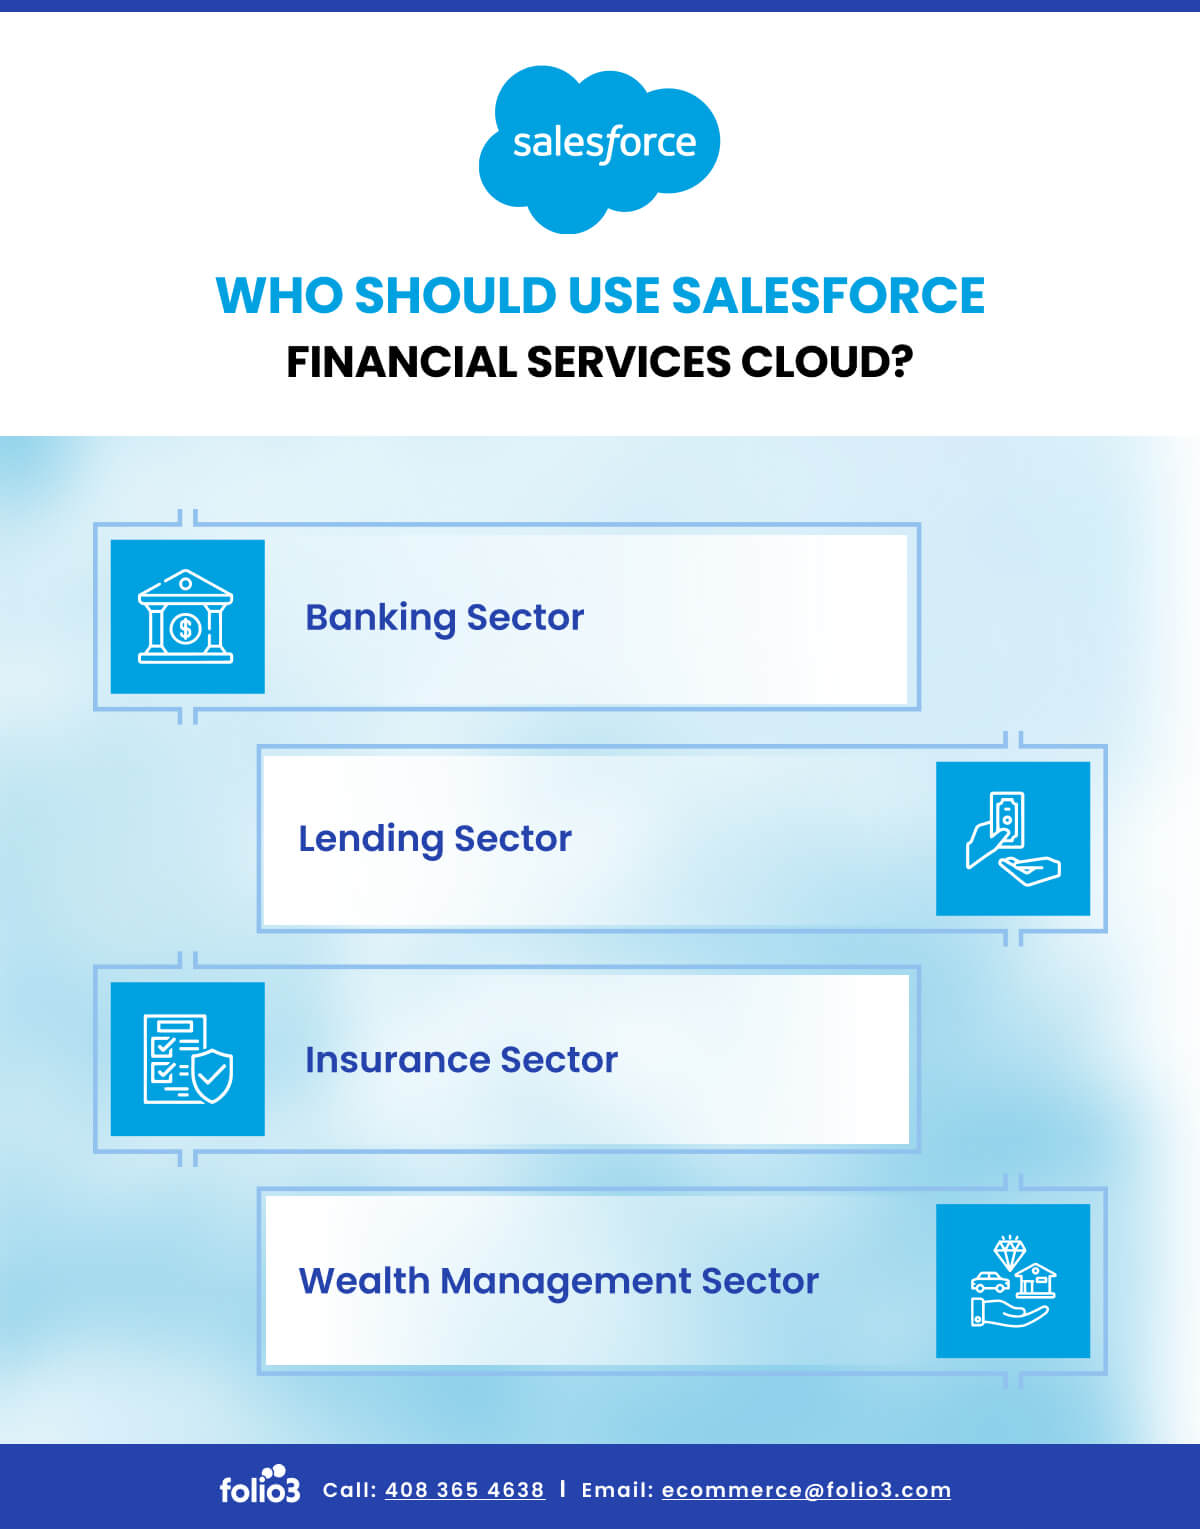 Who Should Use Salesforce Financial Services Cloud